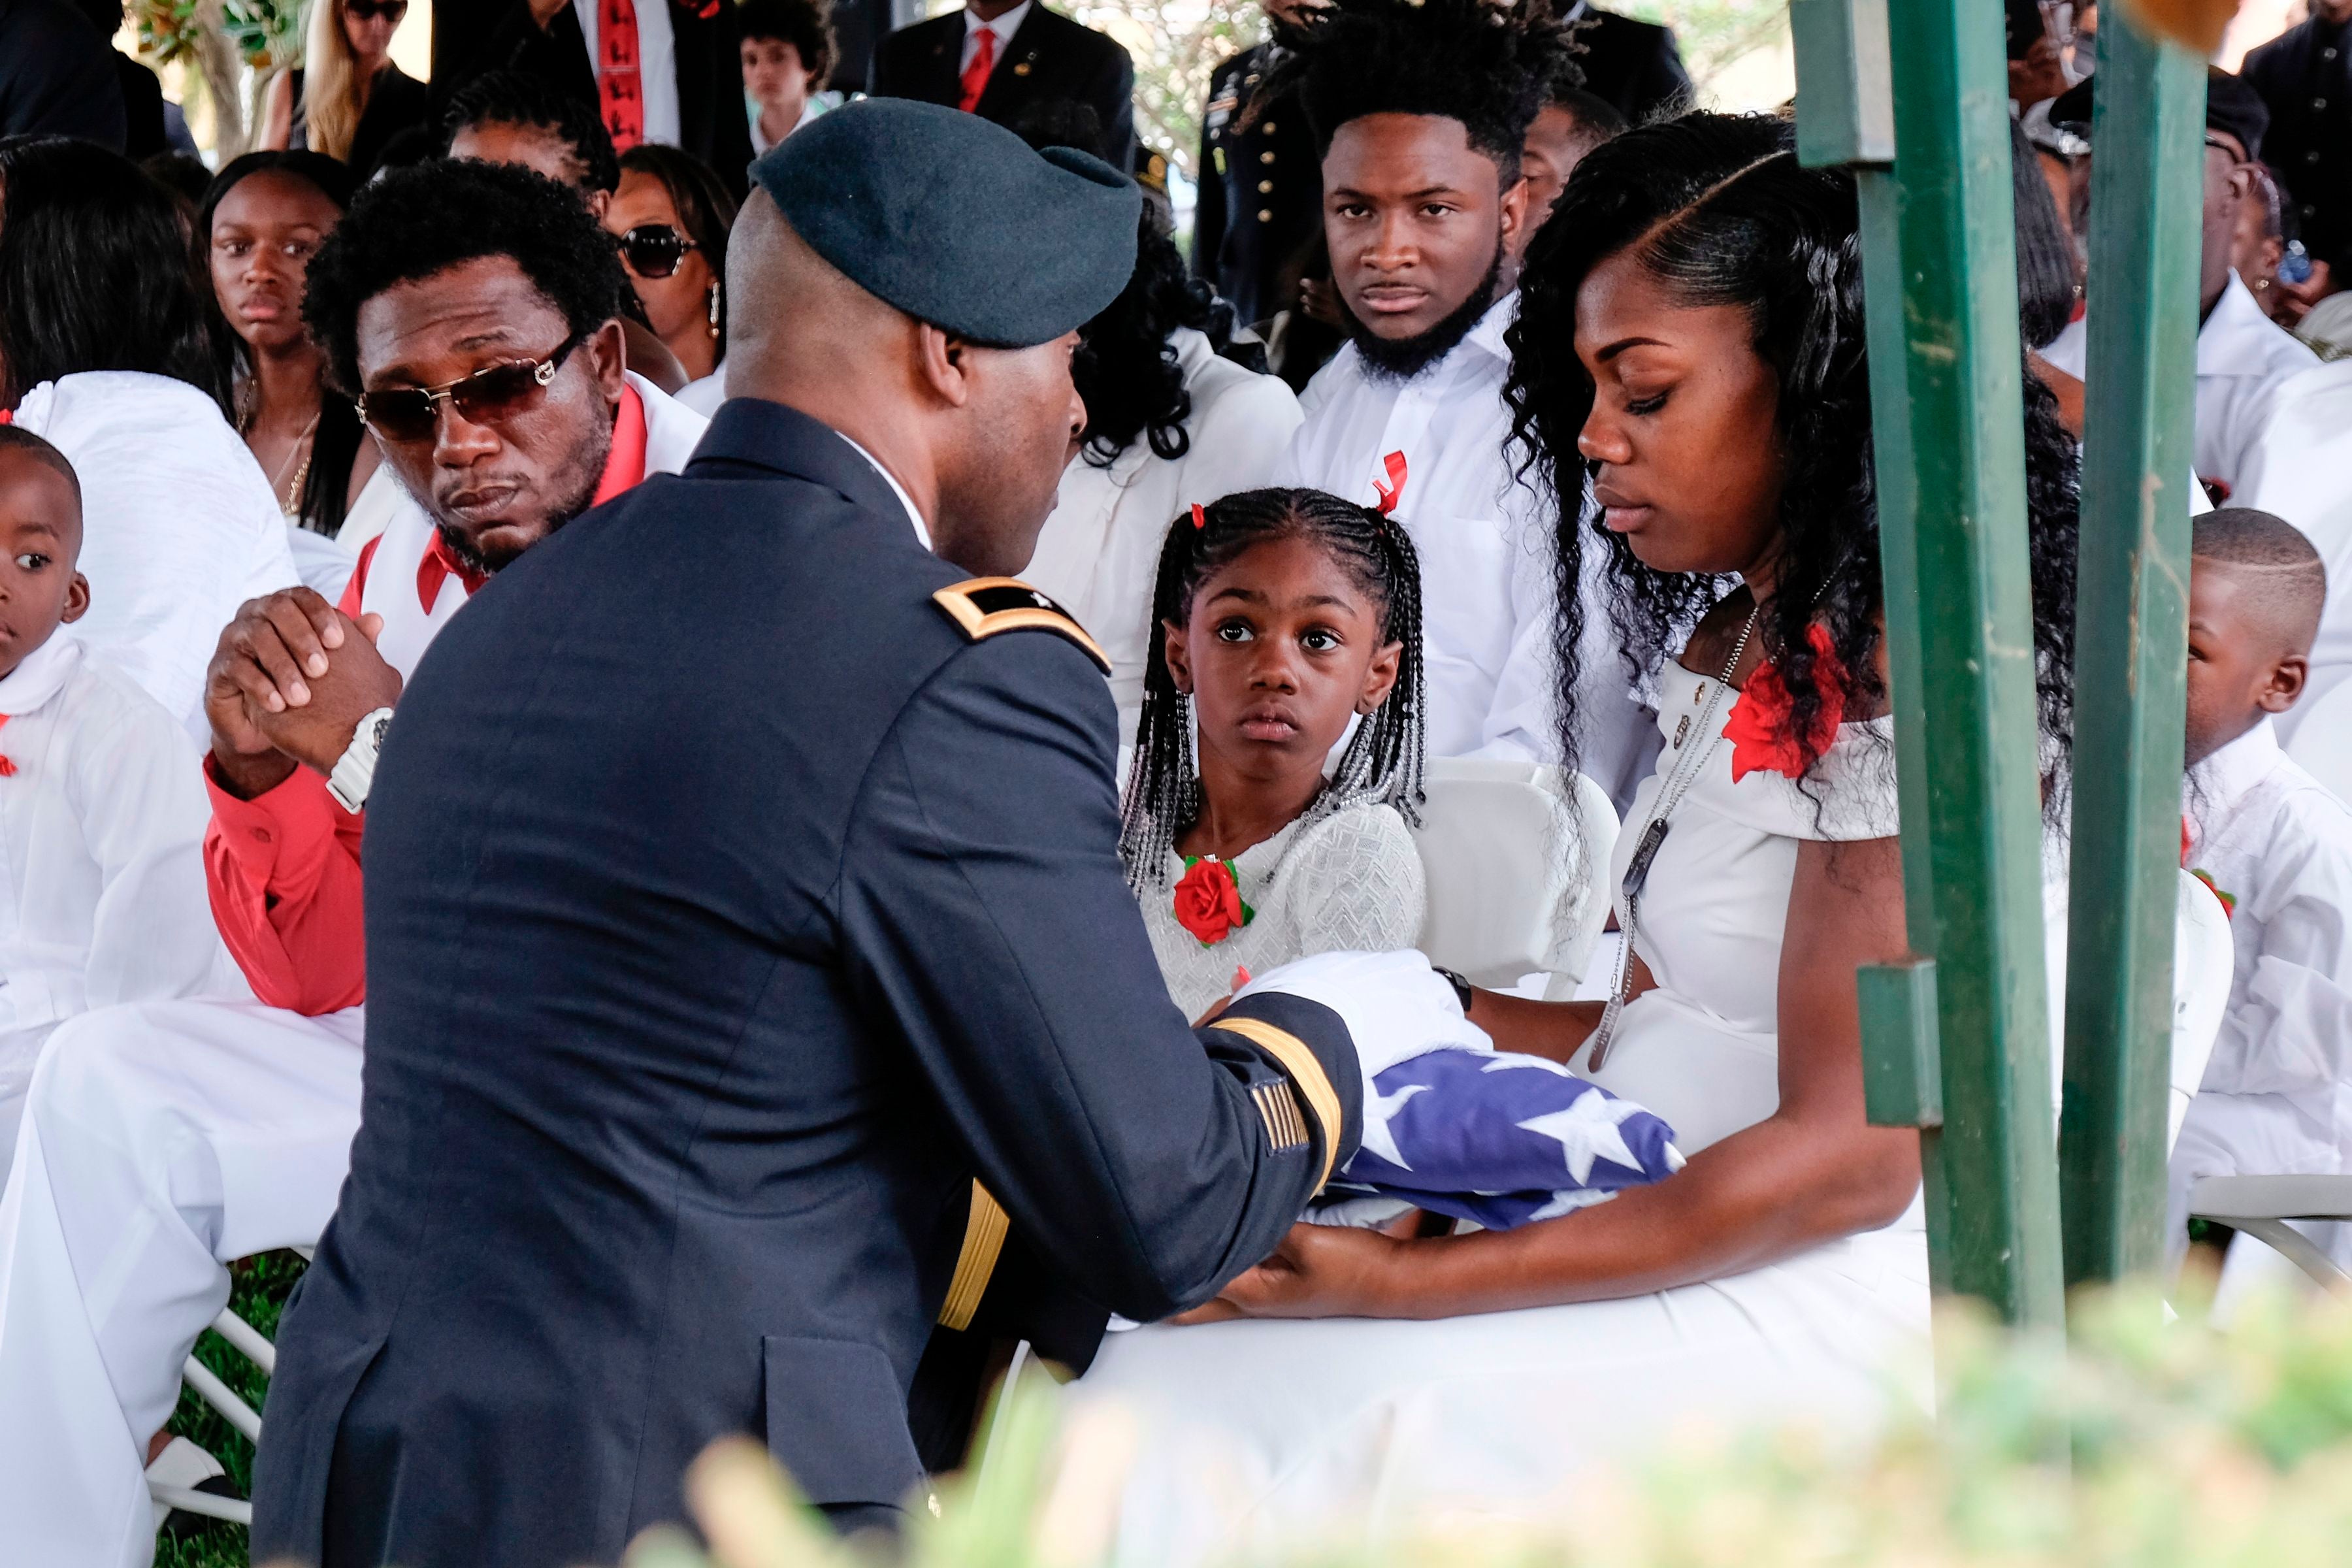 There's A Reason Trump Won't Let Gold Star Widow Myeshia Johnson Grieve In Peace
